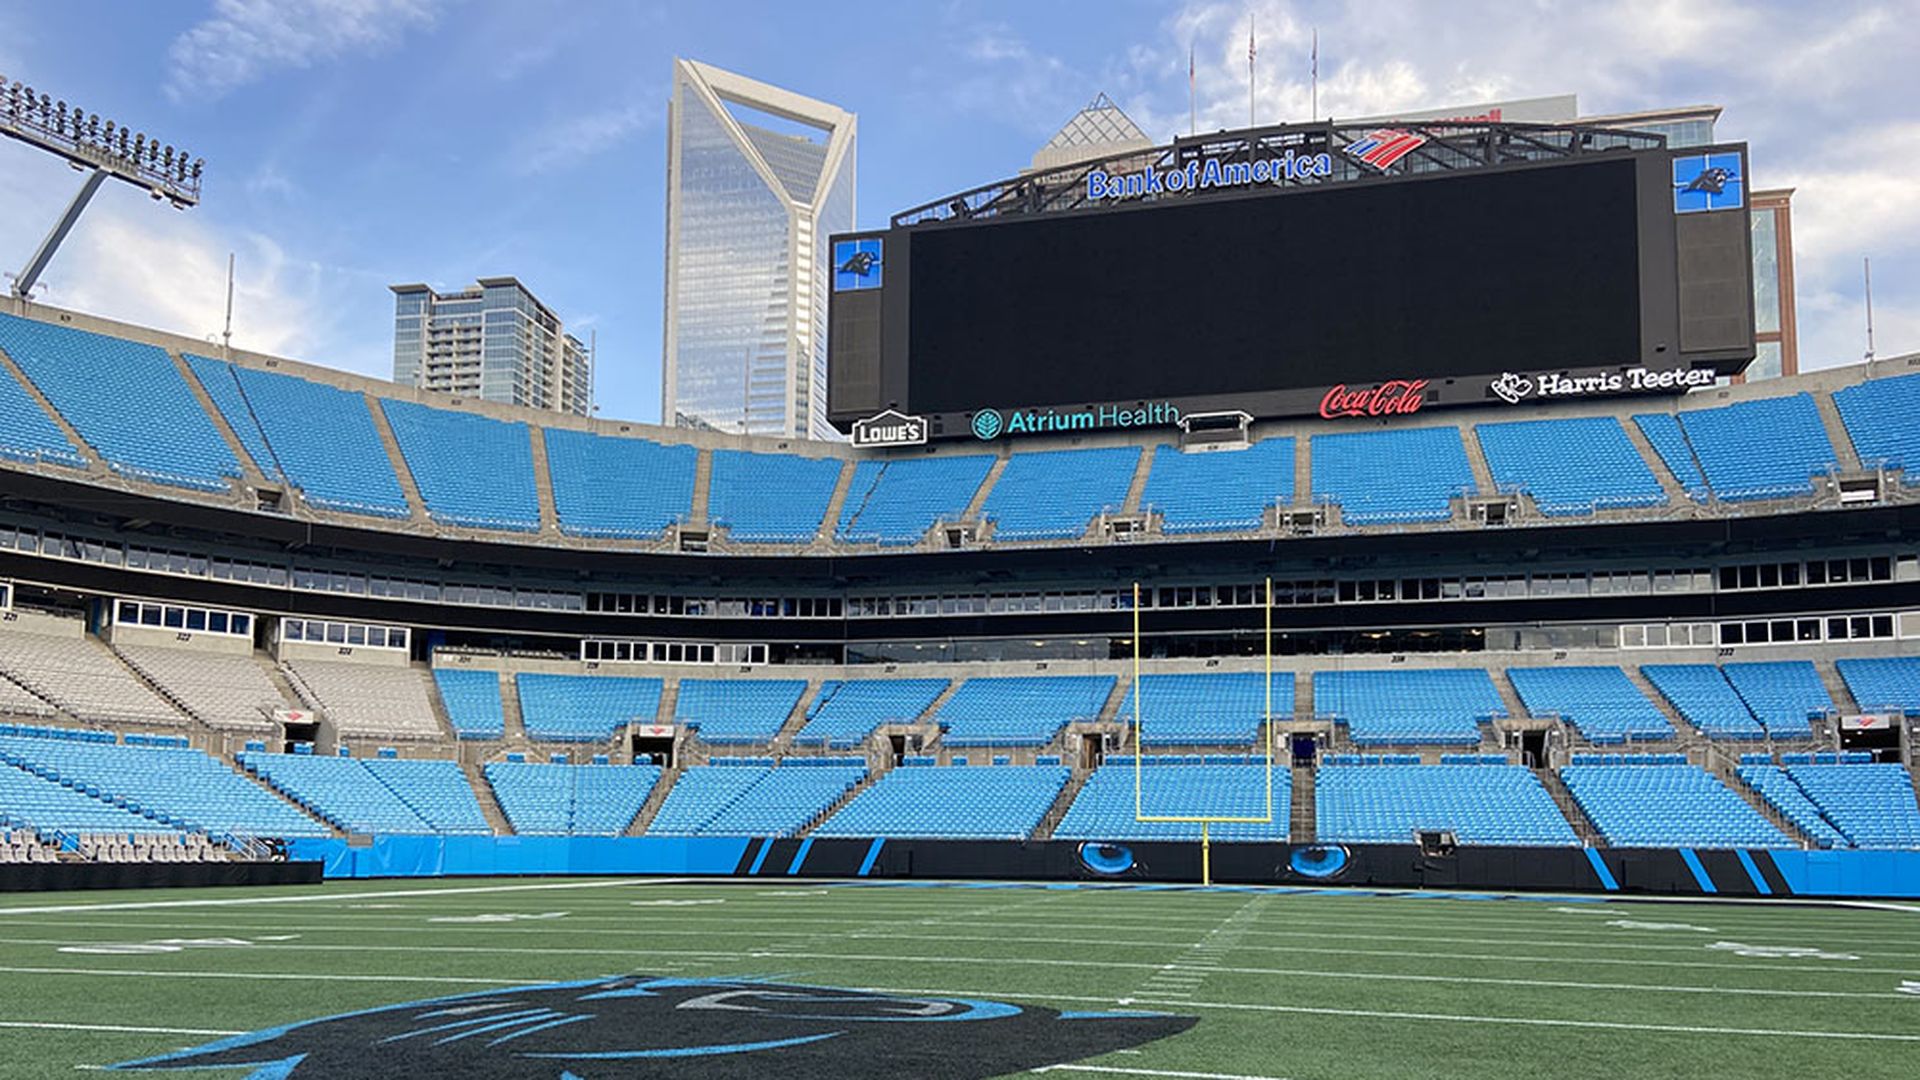 View of the Panthers logo on the field at Bank of America Stadium with the skyline in the background.